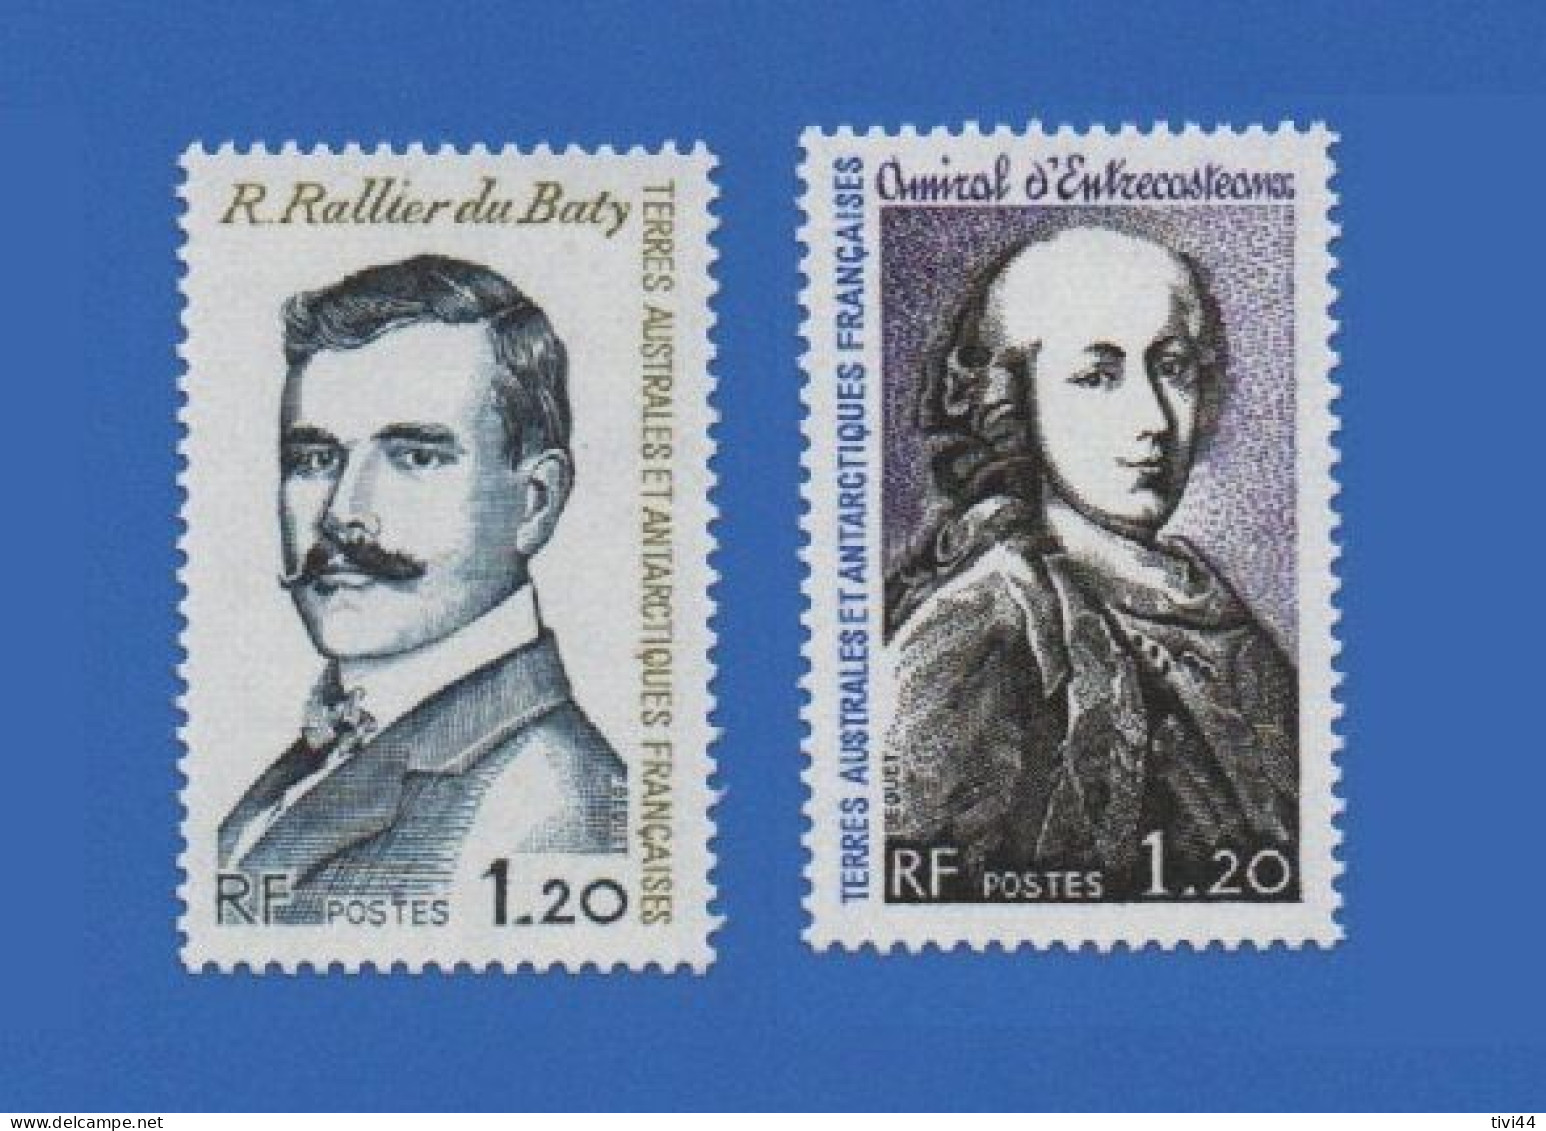 TAAF 76 + 83 NEUFS ** RALLIER DU BATY + AMIRAL D'ENTRECASTEAUX - Unused Stamps